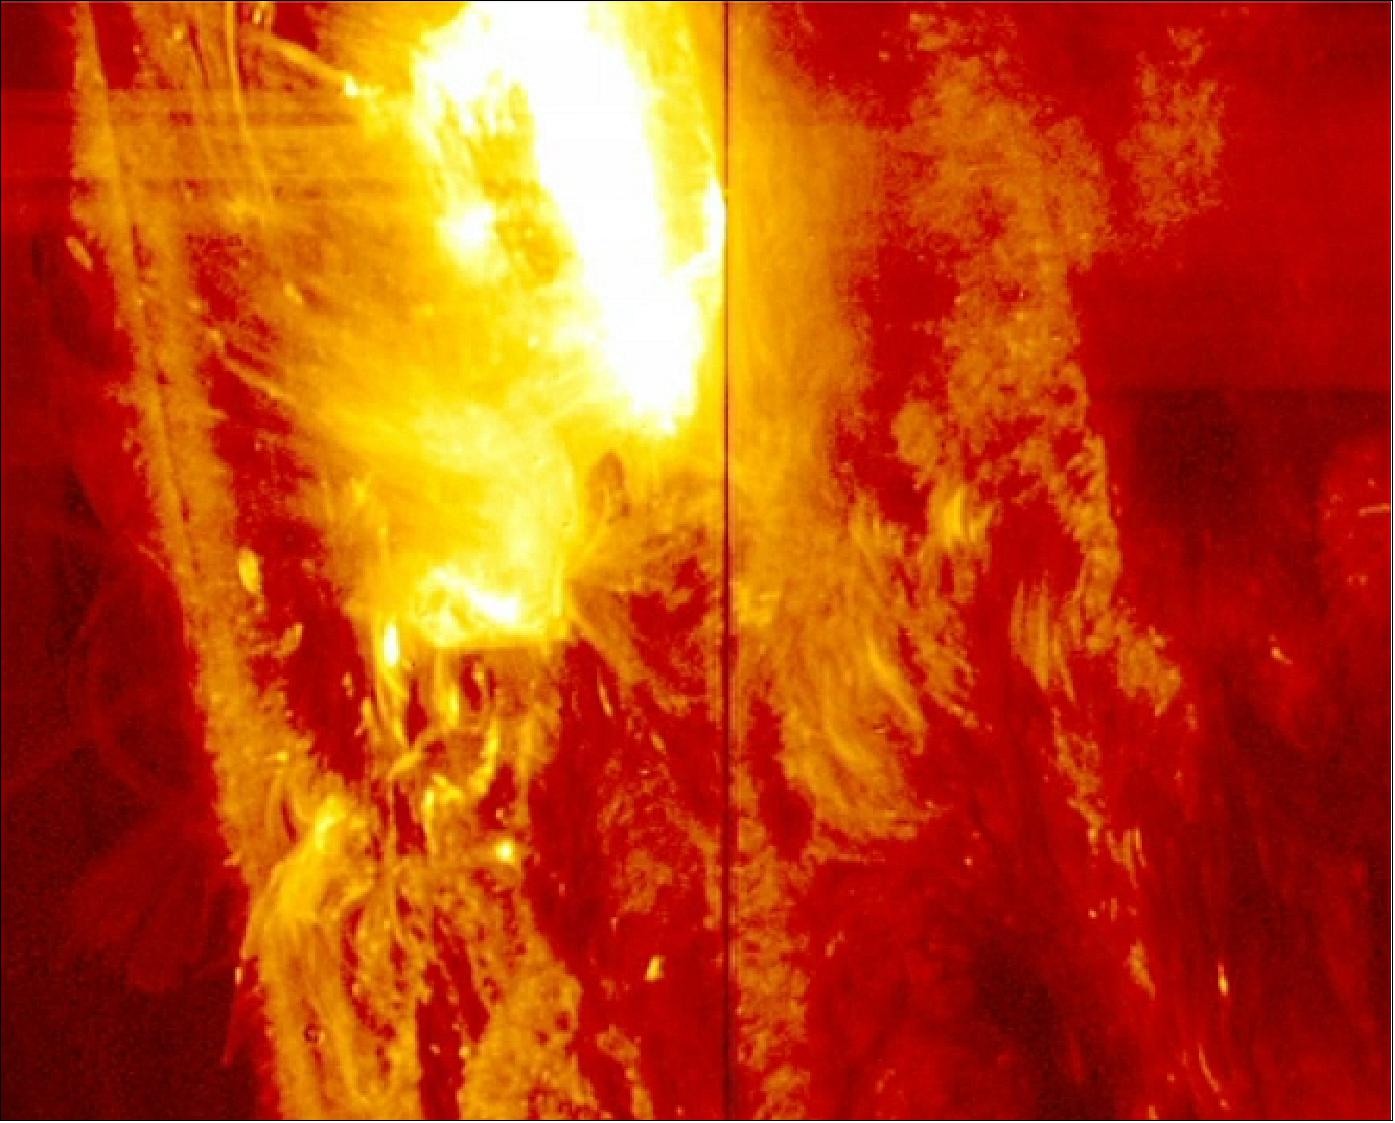 Figure 22: NASA's IRIS witnessed its strongest solar flare since it launched in the summer of 2013 (image credit: NASA, IRIS)